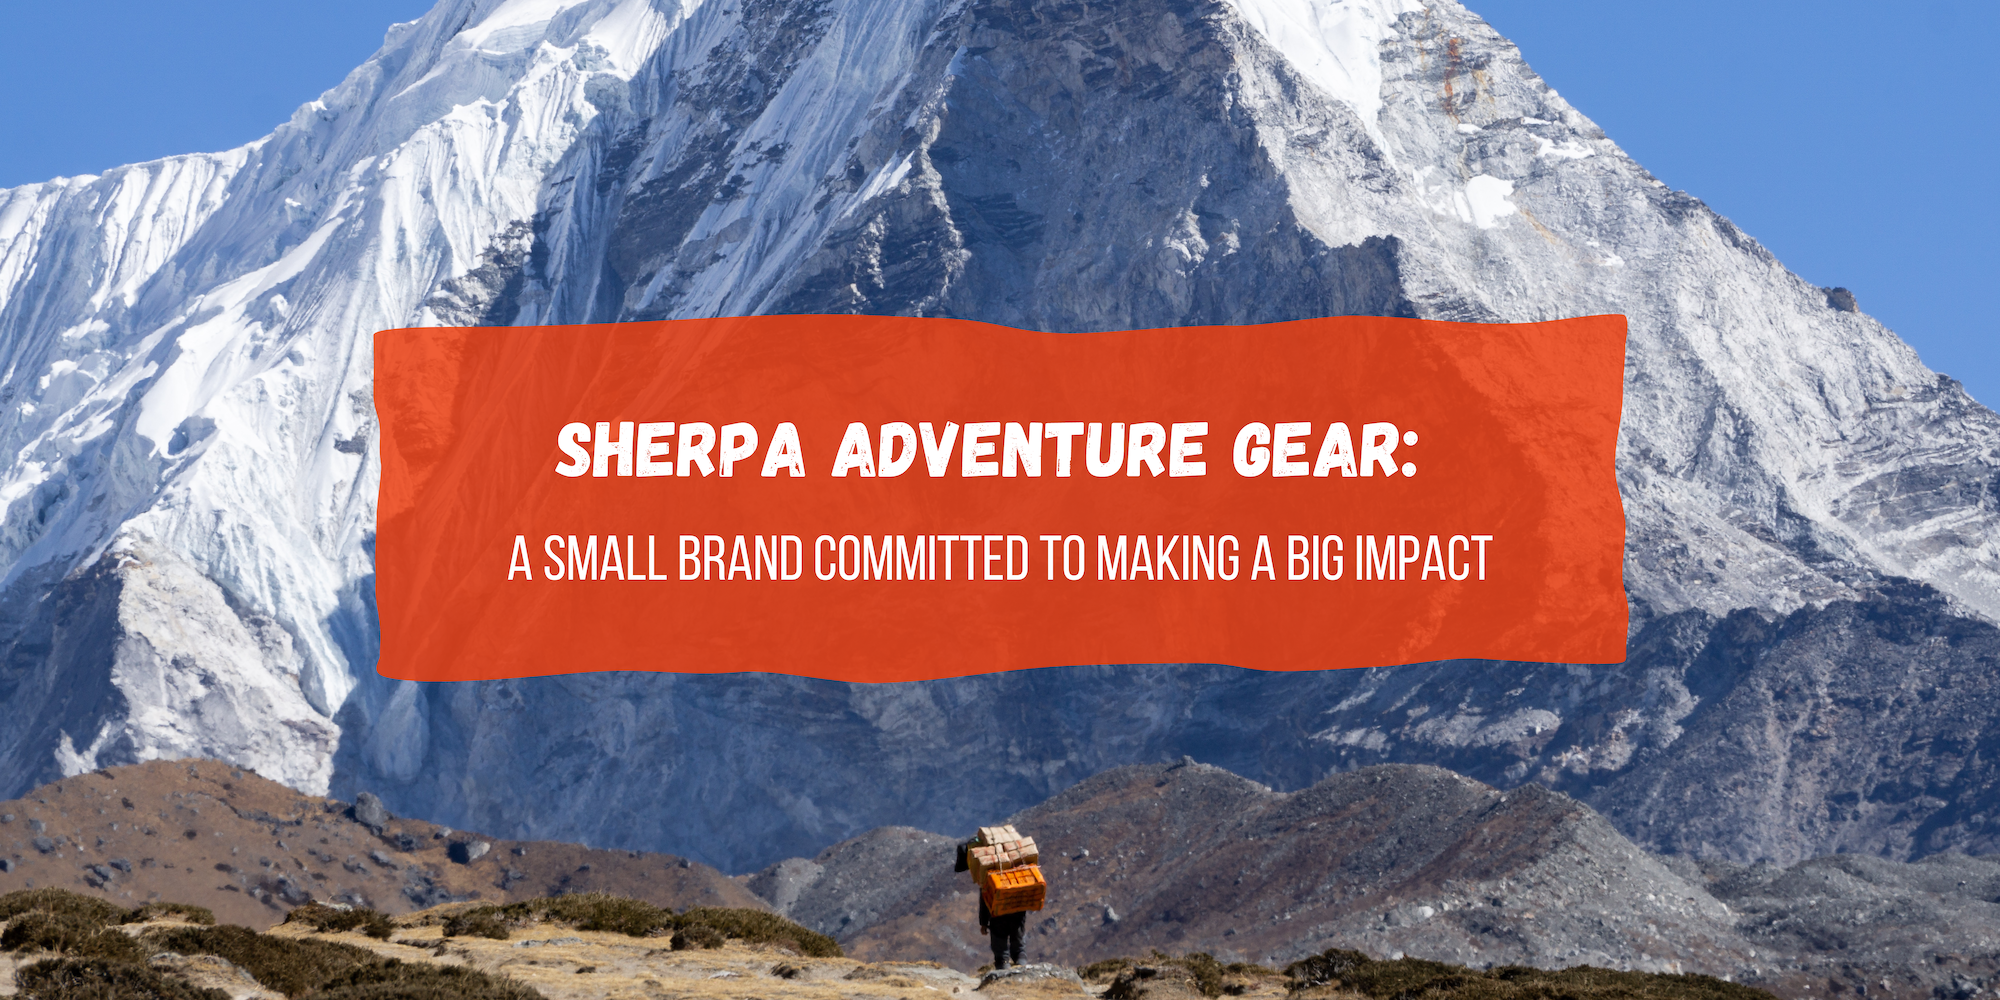 The Story Behind the Brand: Sherpa Adventure Gear